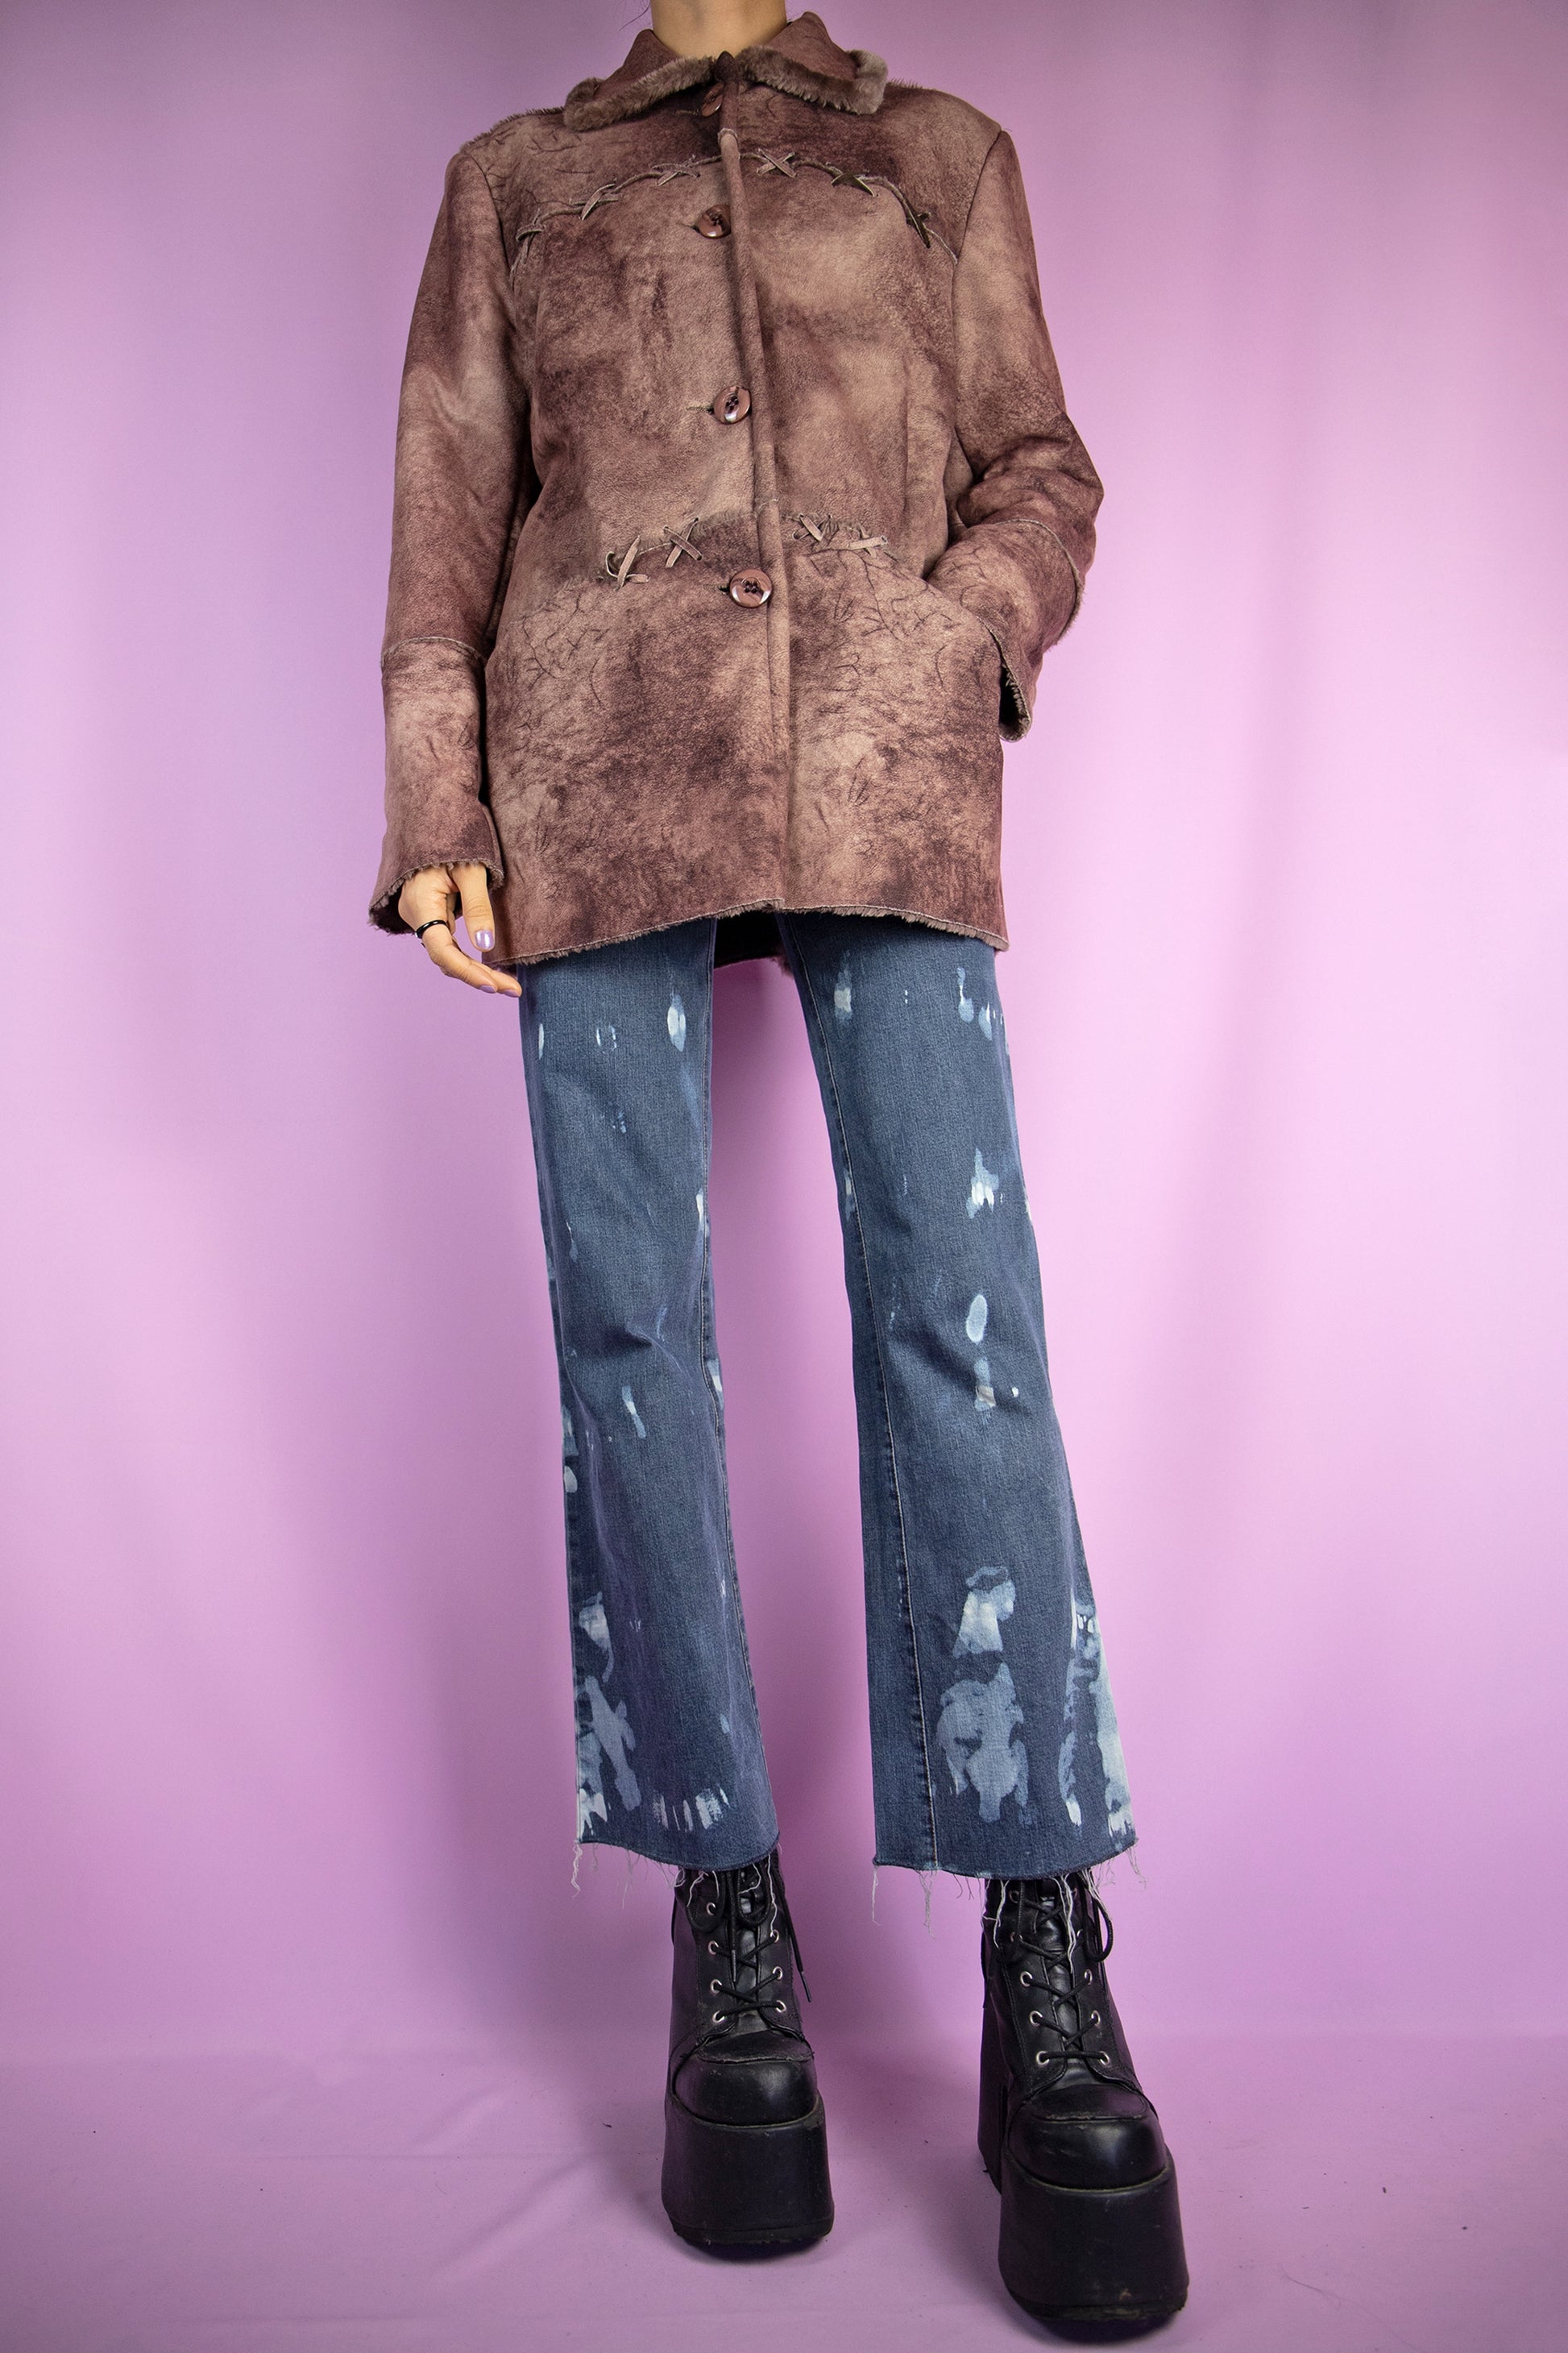 The Y2K Printed Faux Fur Jacket is a vintage 2000s winter brown abstract tie-dye pattern statement coat with a collar, pockets, and buttons.